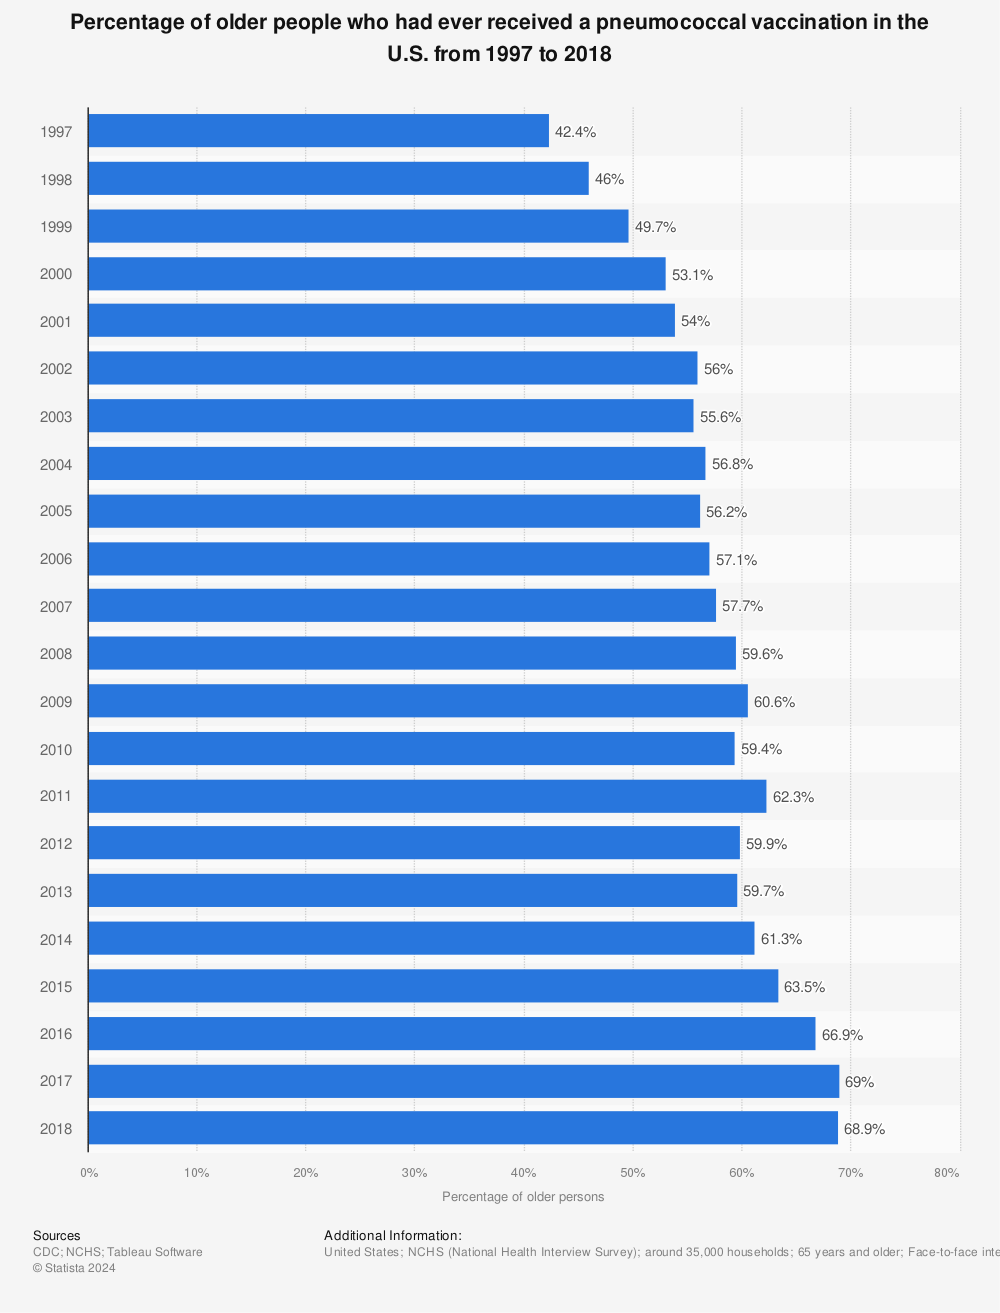 Statistic: Percentage of older people who had ever received a pneumococcal vaccination in the U.S. from 1997 to 2018 | Statista